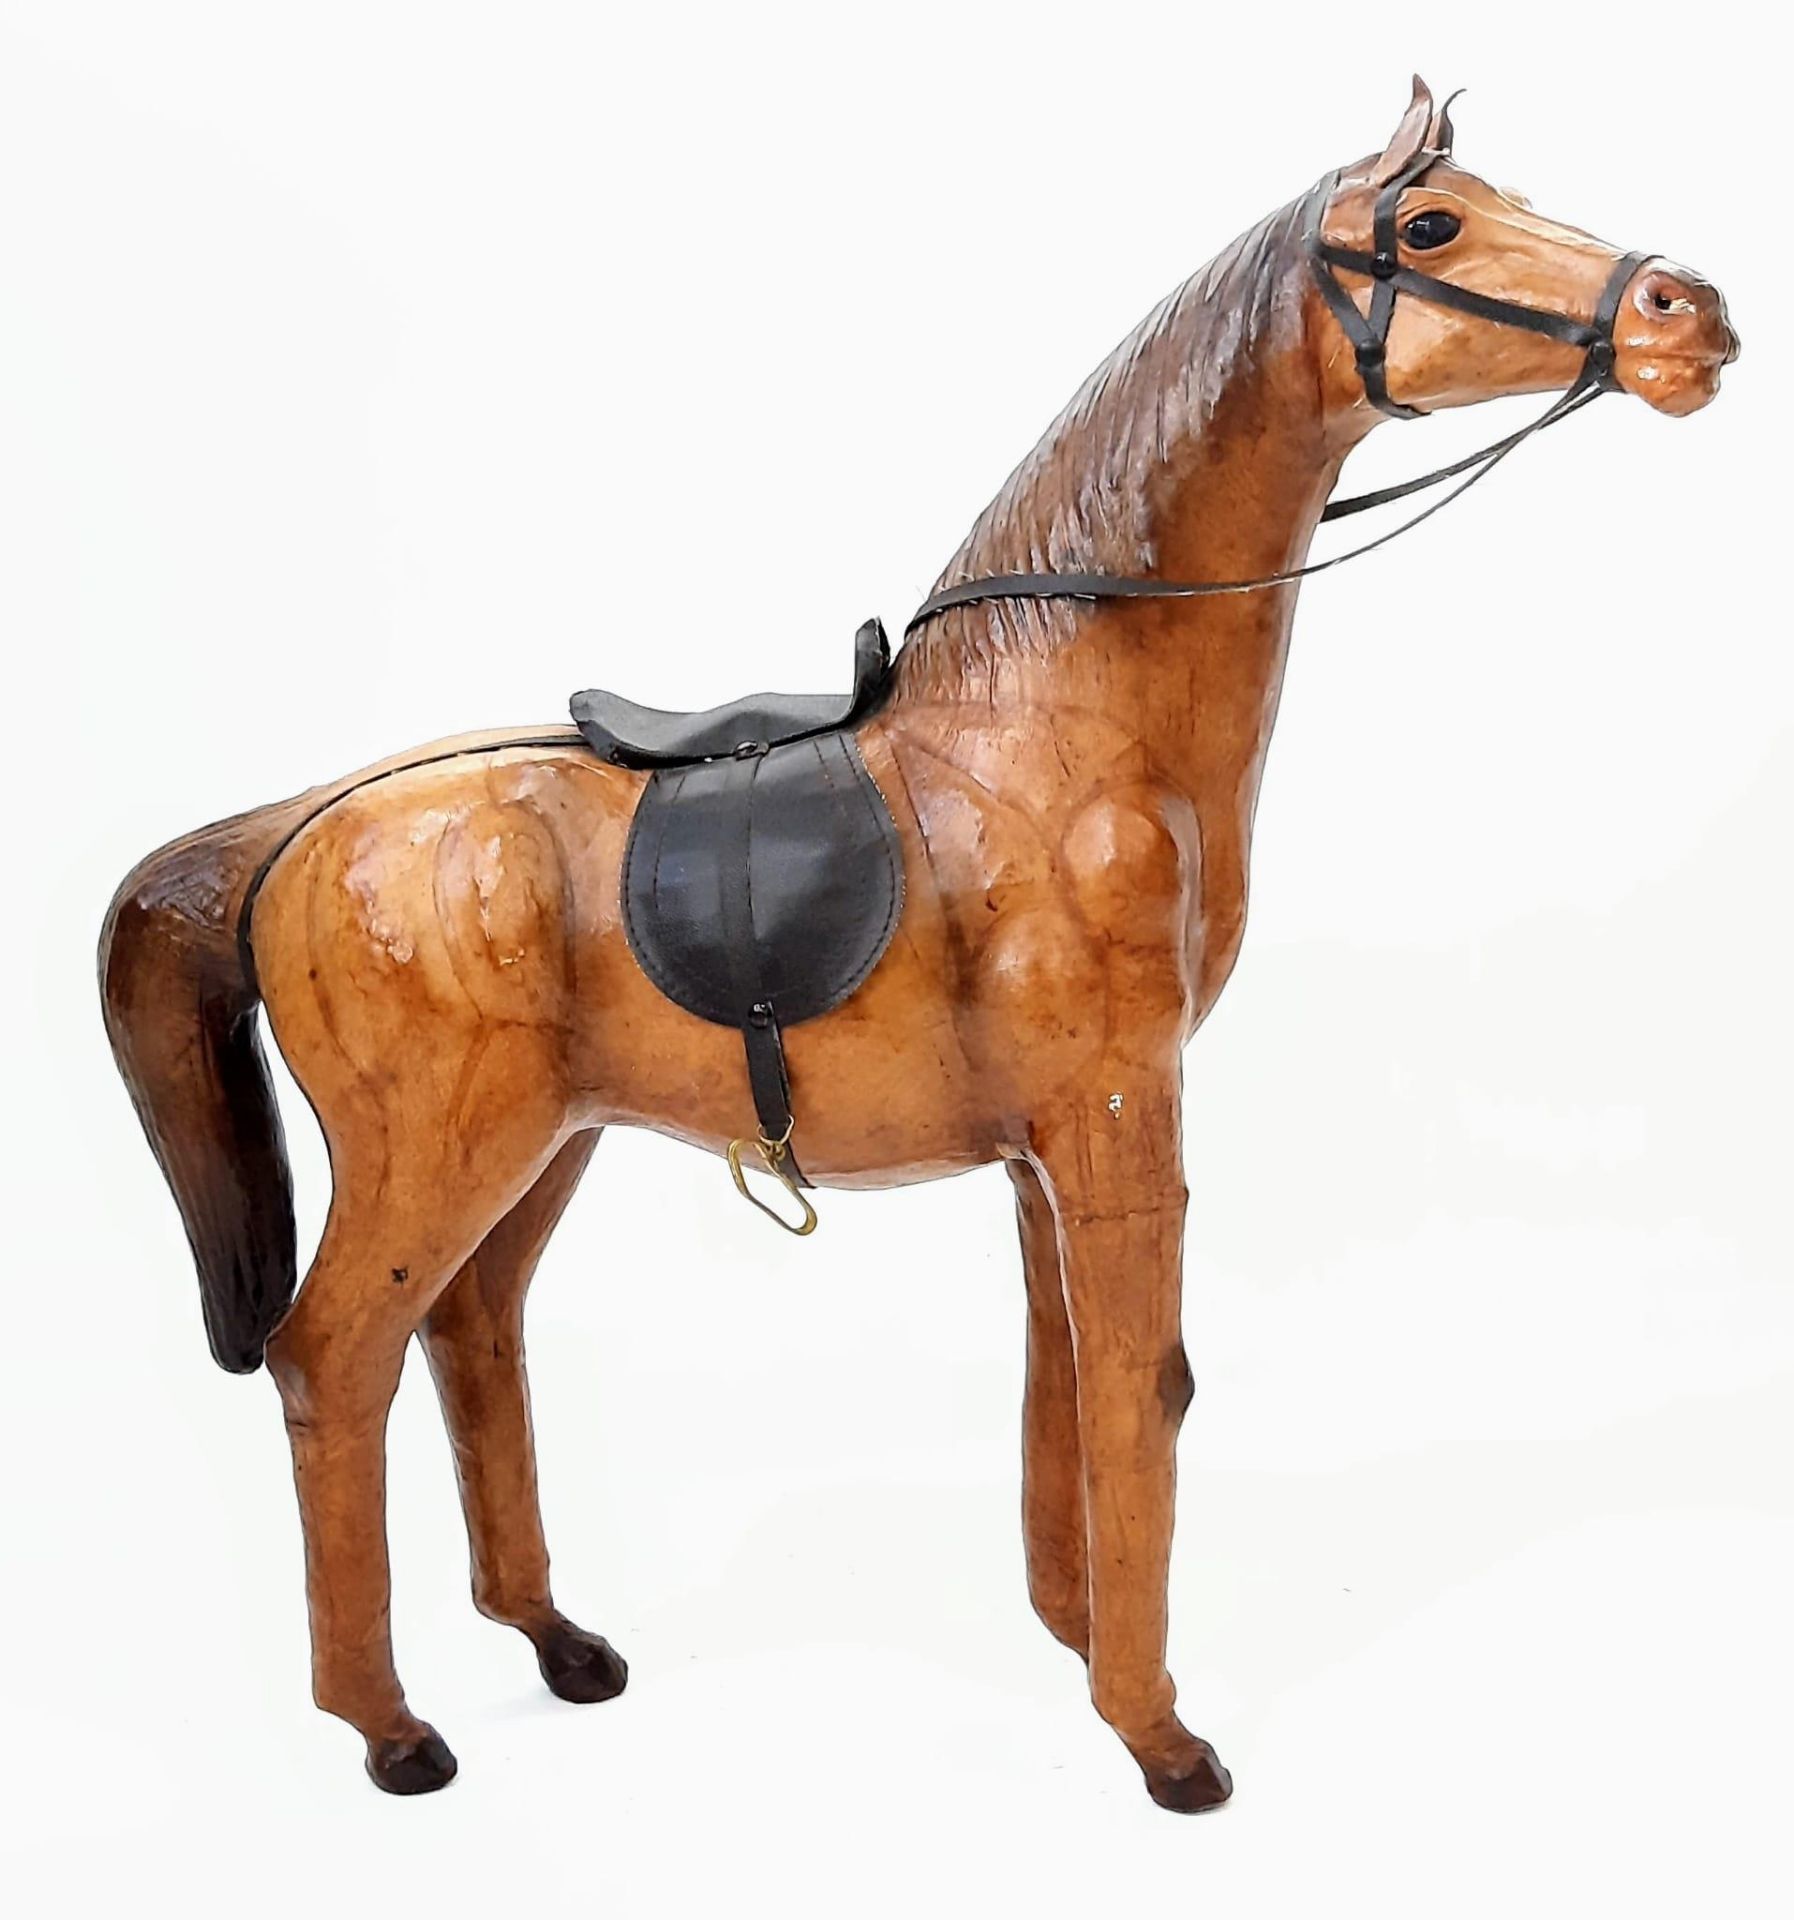 An impressive Liberty of London, Leather Horse Statue. Wonderful quality and superior